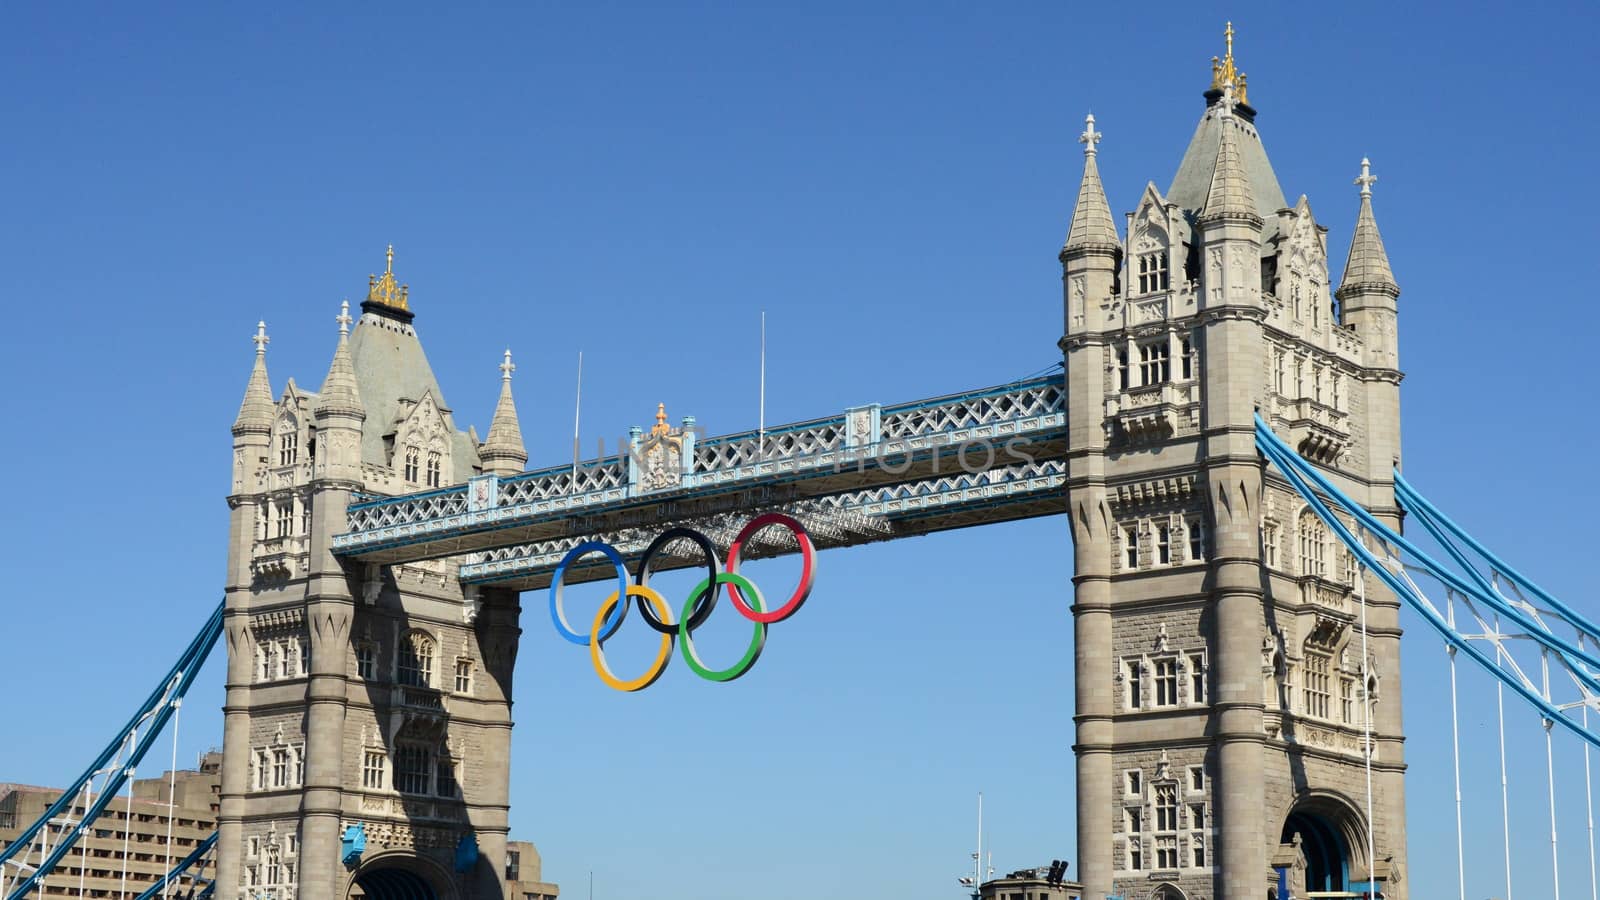 London tower bridge with olympic rings by gorilla